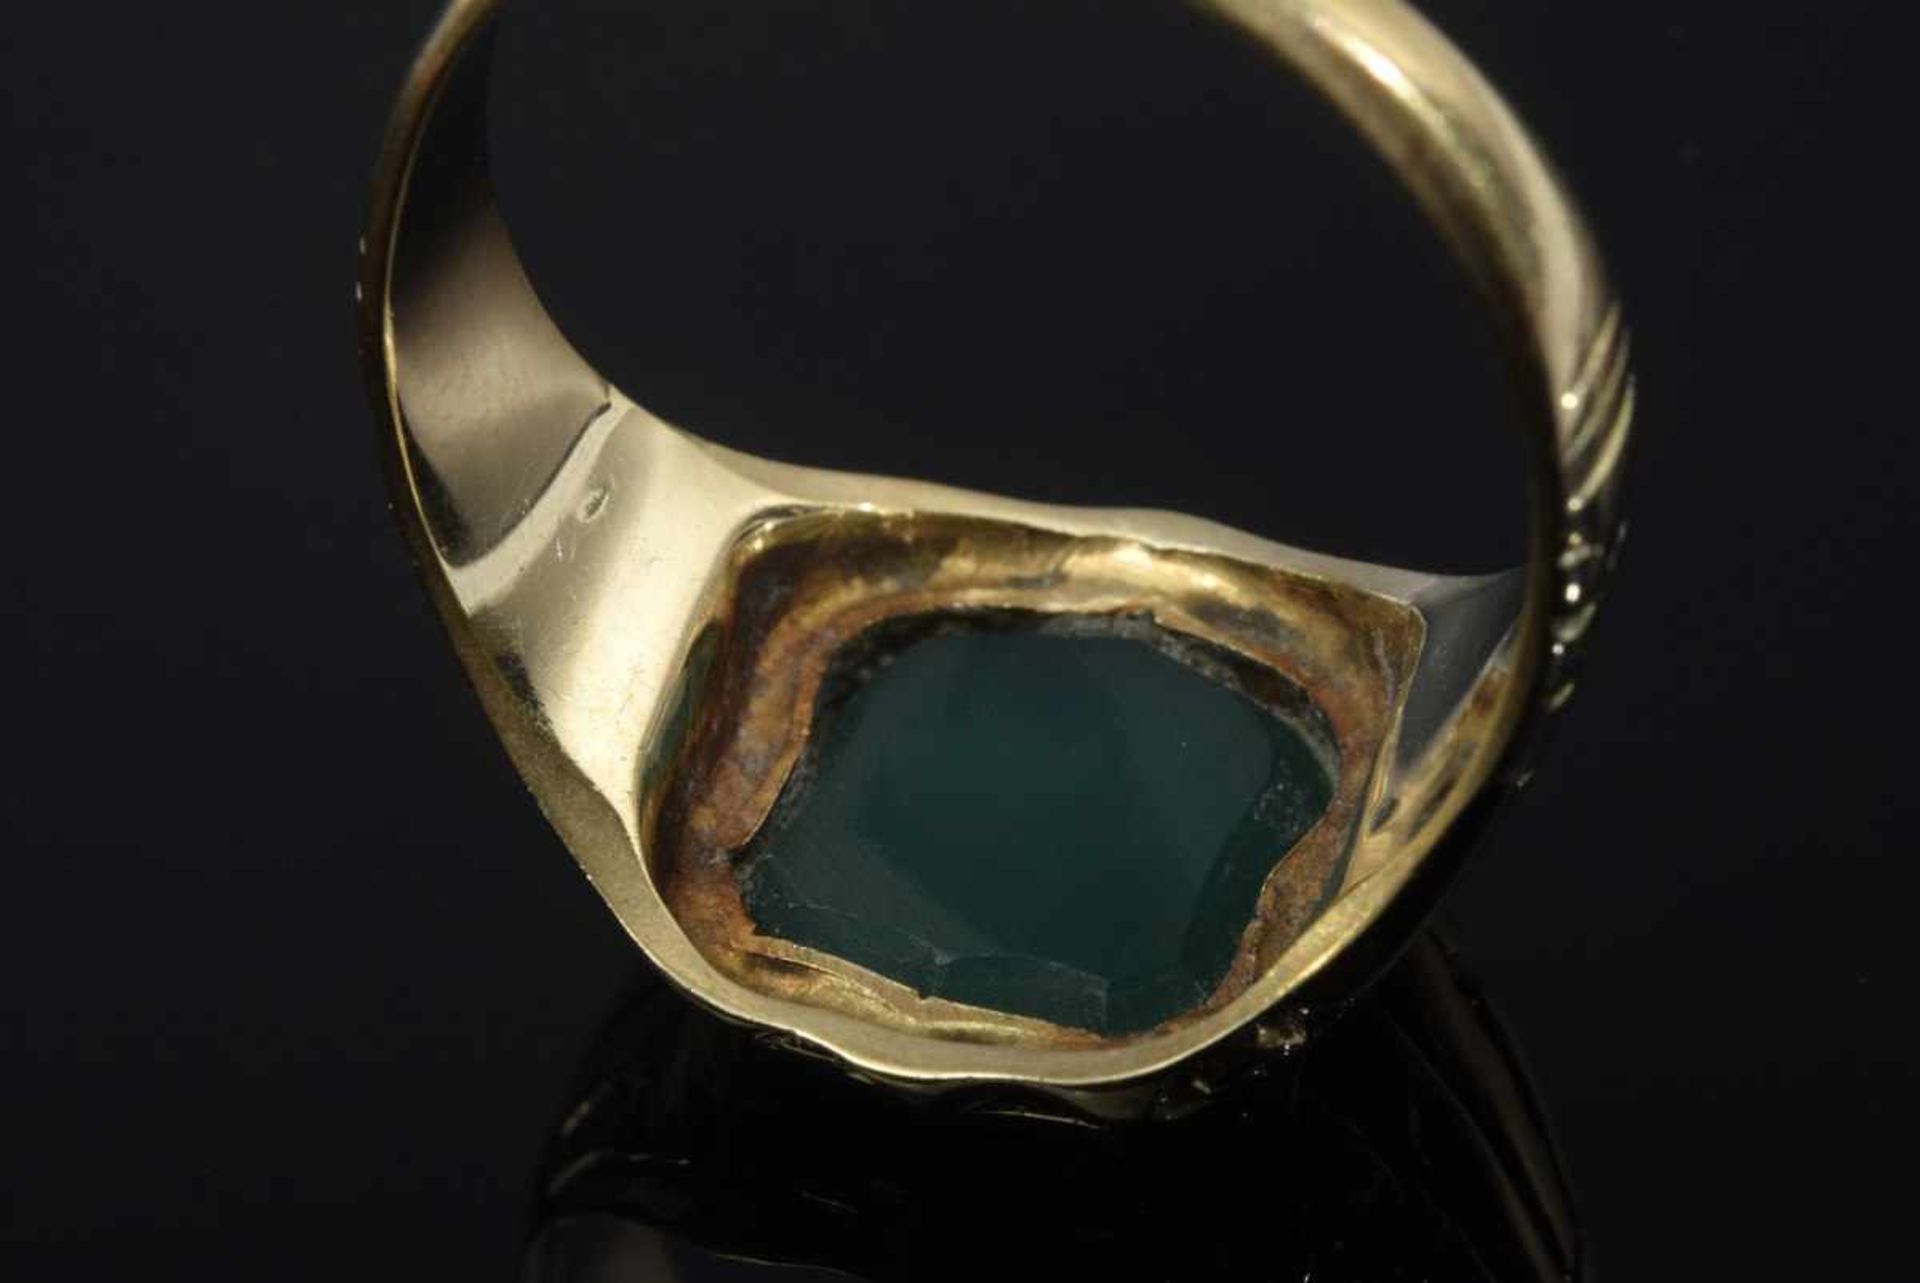 GG 585 Seal ring with plate of green coloured agate in heraldic cartouche form, 6,5g, size 66GG - Bild 3 aus 3